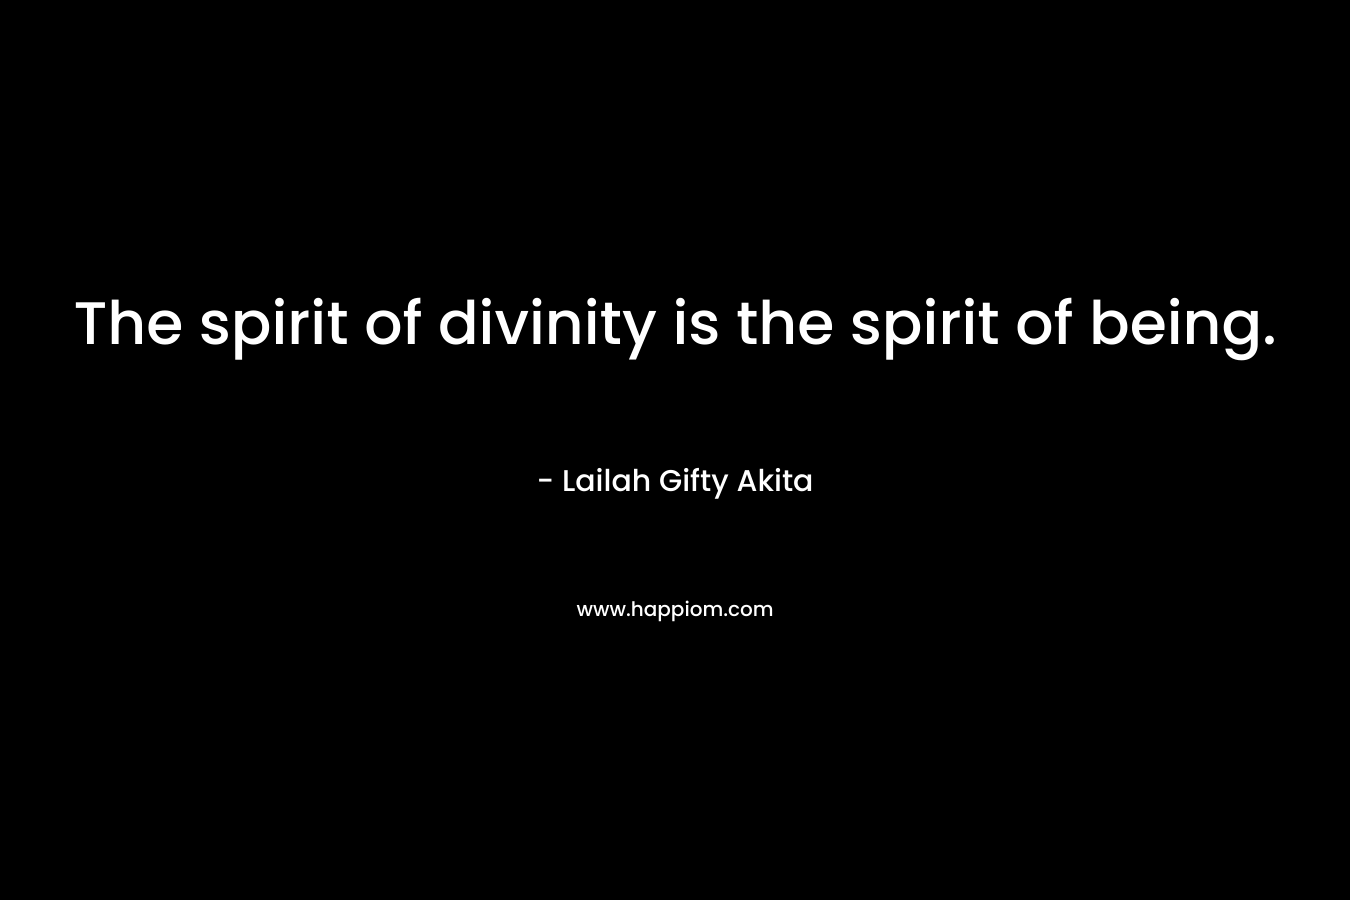 The spirit of divinity is the spirit of being.